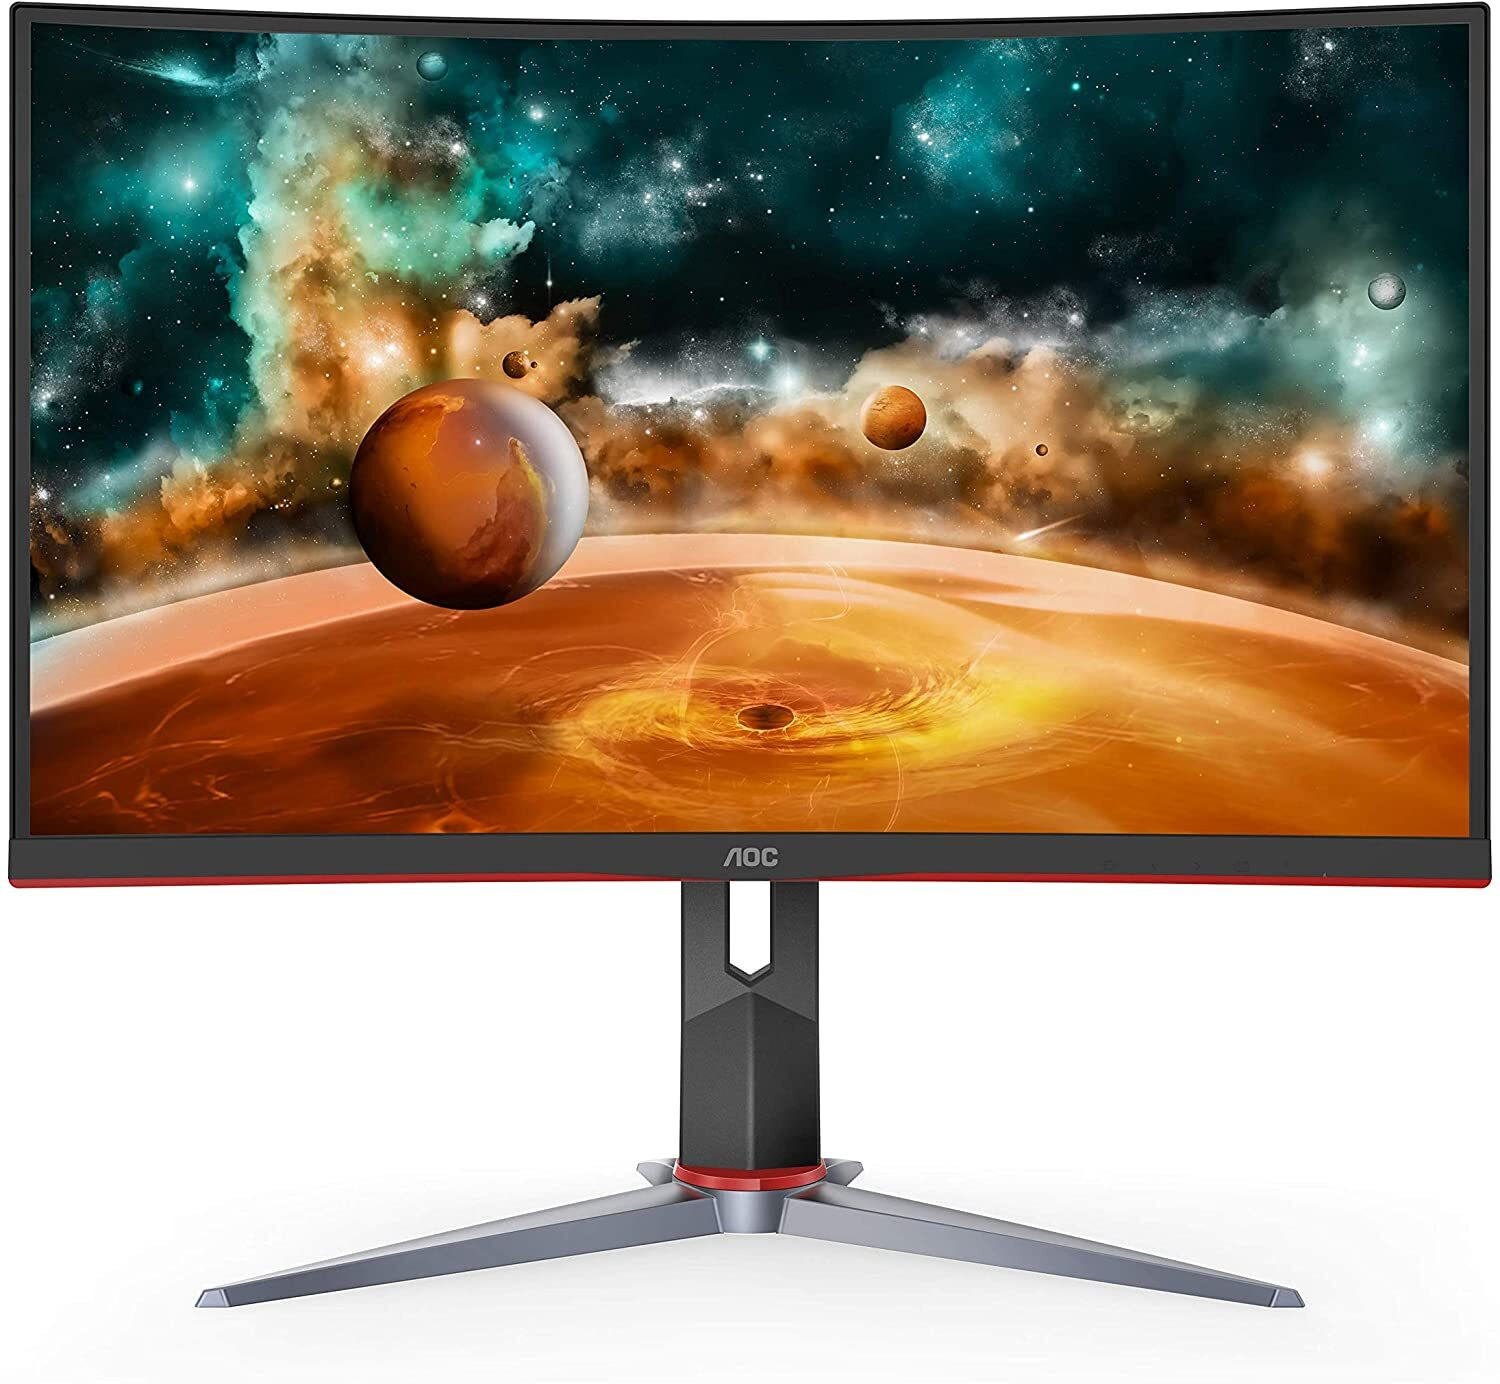 The Best Gaming Monitor Under 300$ 2022: AOC CQ27G2